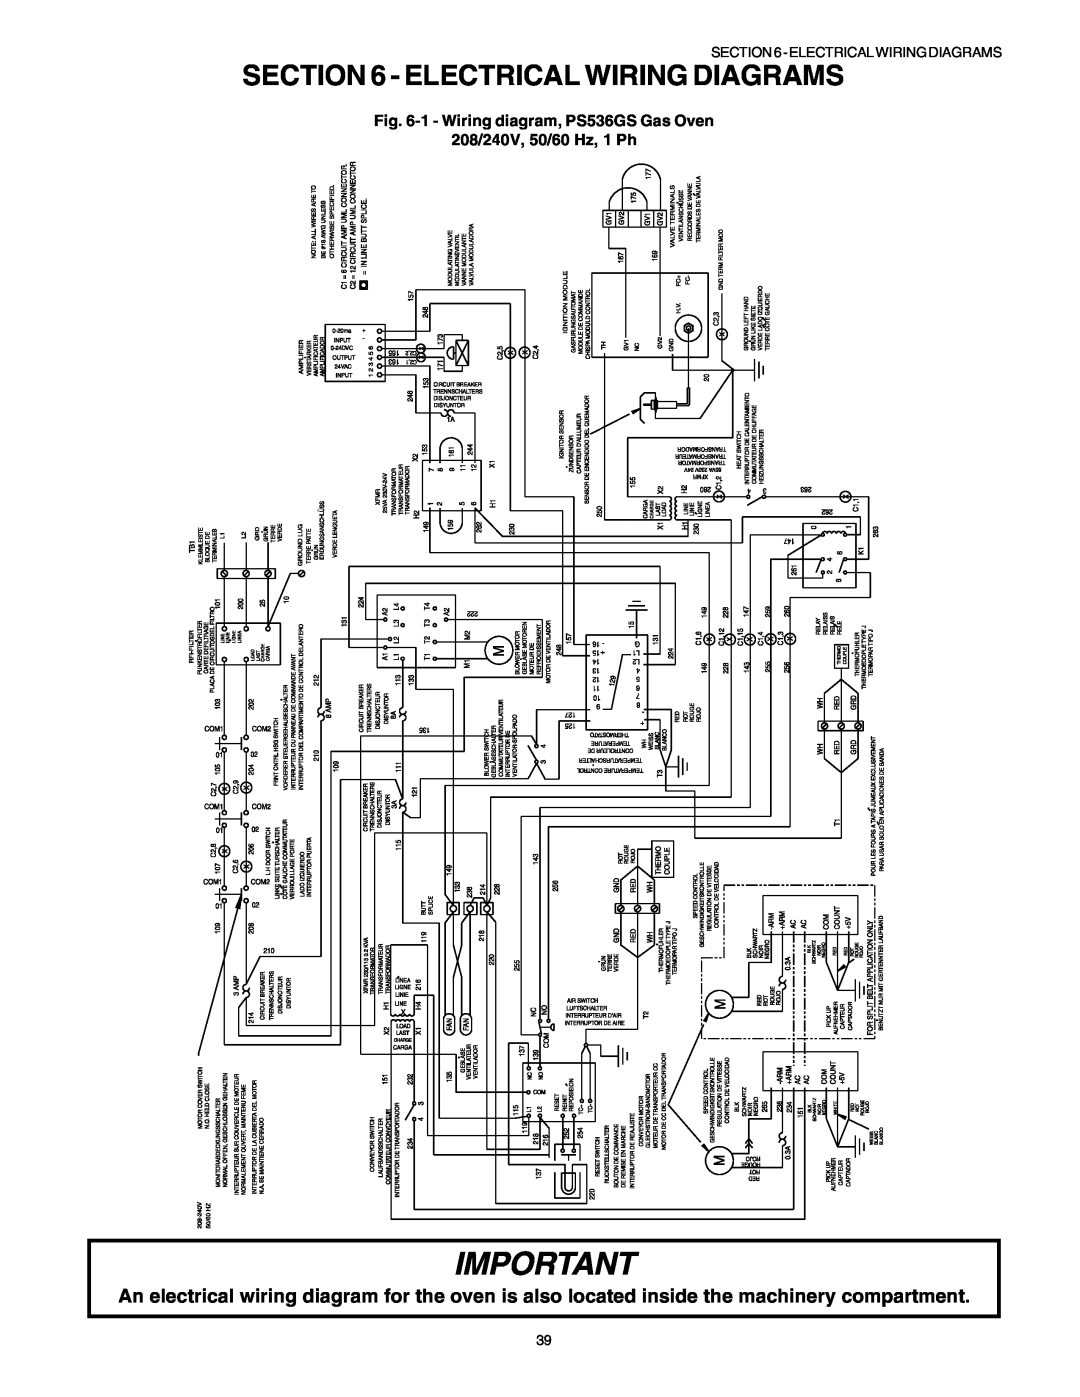 Middleby Marshall PS53GS Gas Electrical Wiring Diagrams, 1 - Wiring diagram, PS536GS Gas Oven 208/240V, 50/60 Hz, 1 Ph 